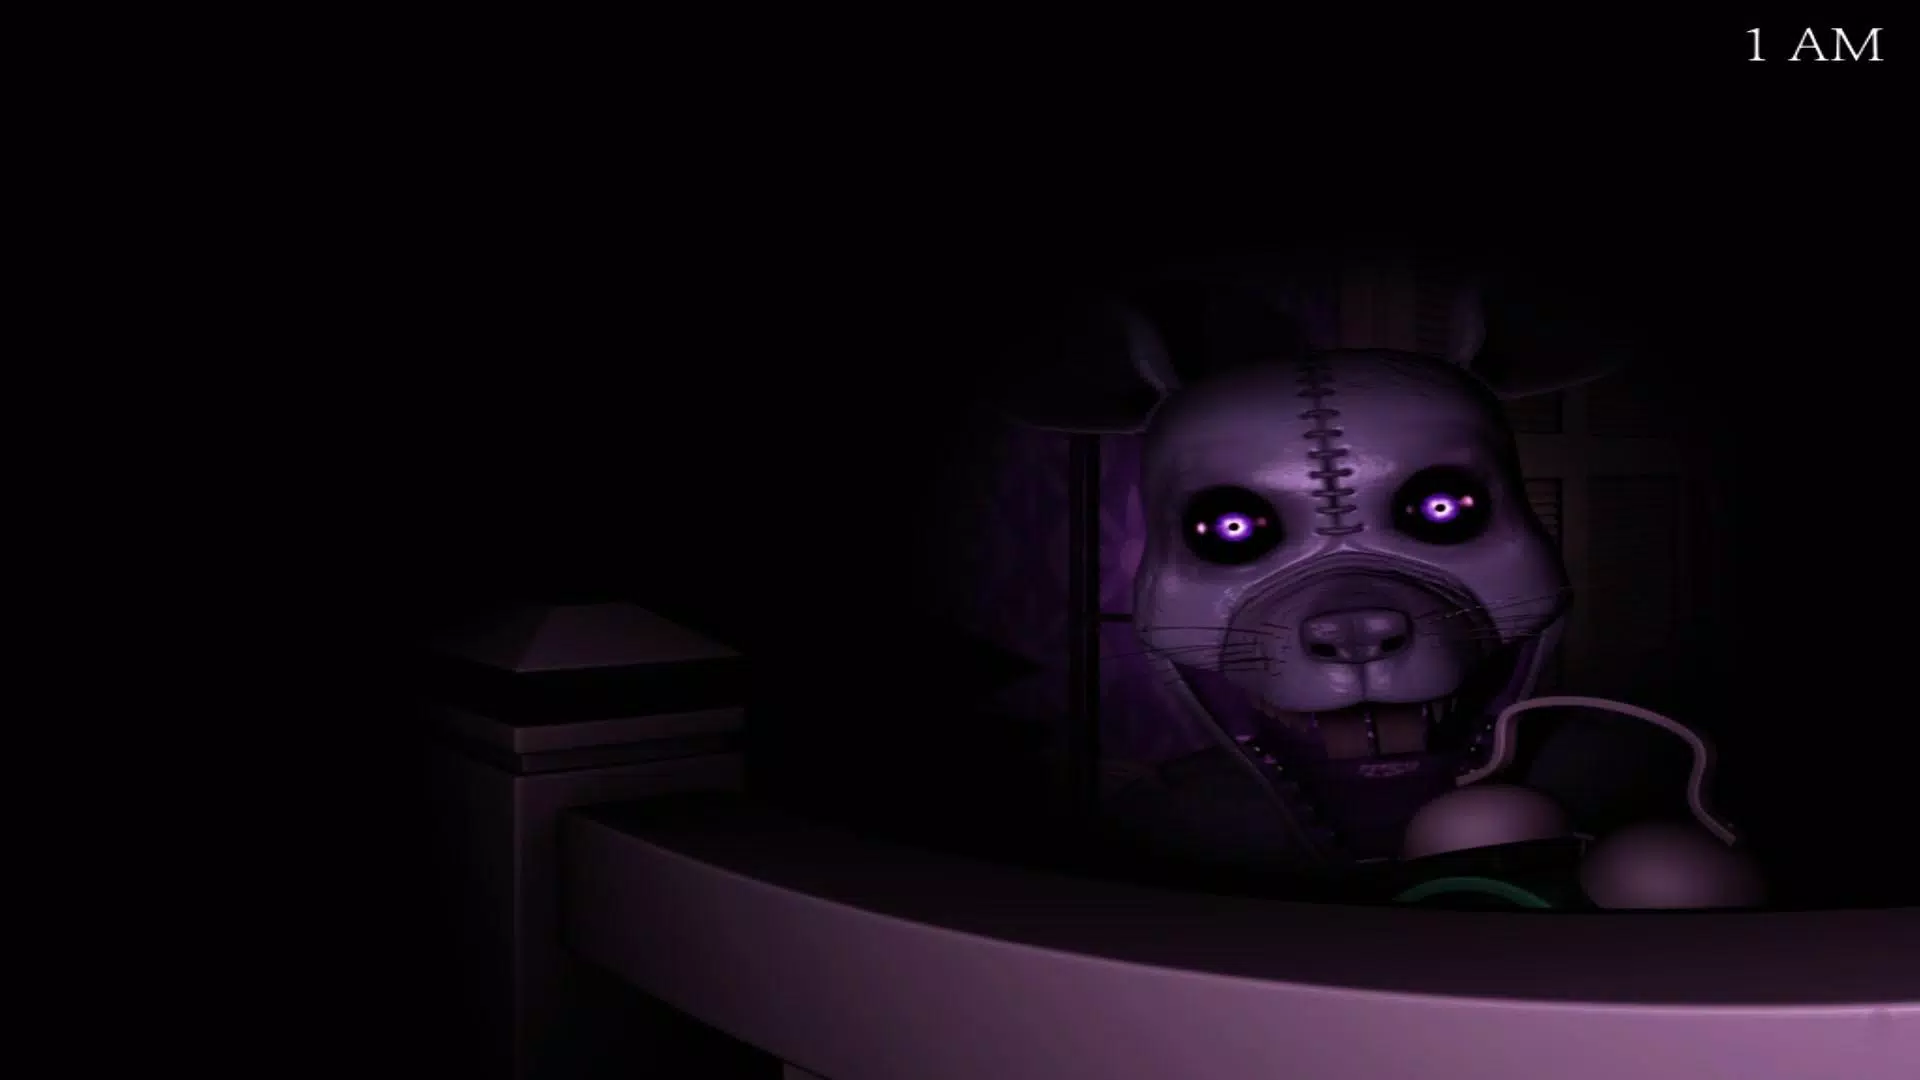 Cheats For FNAC Five Nights at Candy's 3 APK + Mod for Android.